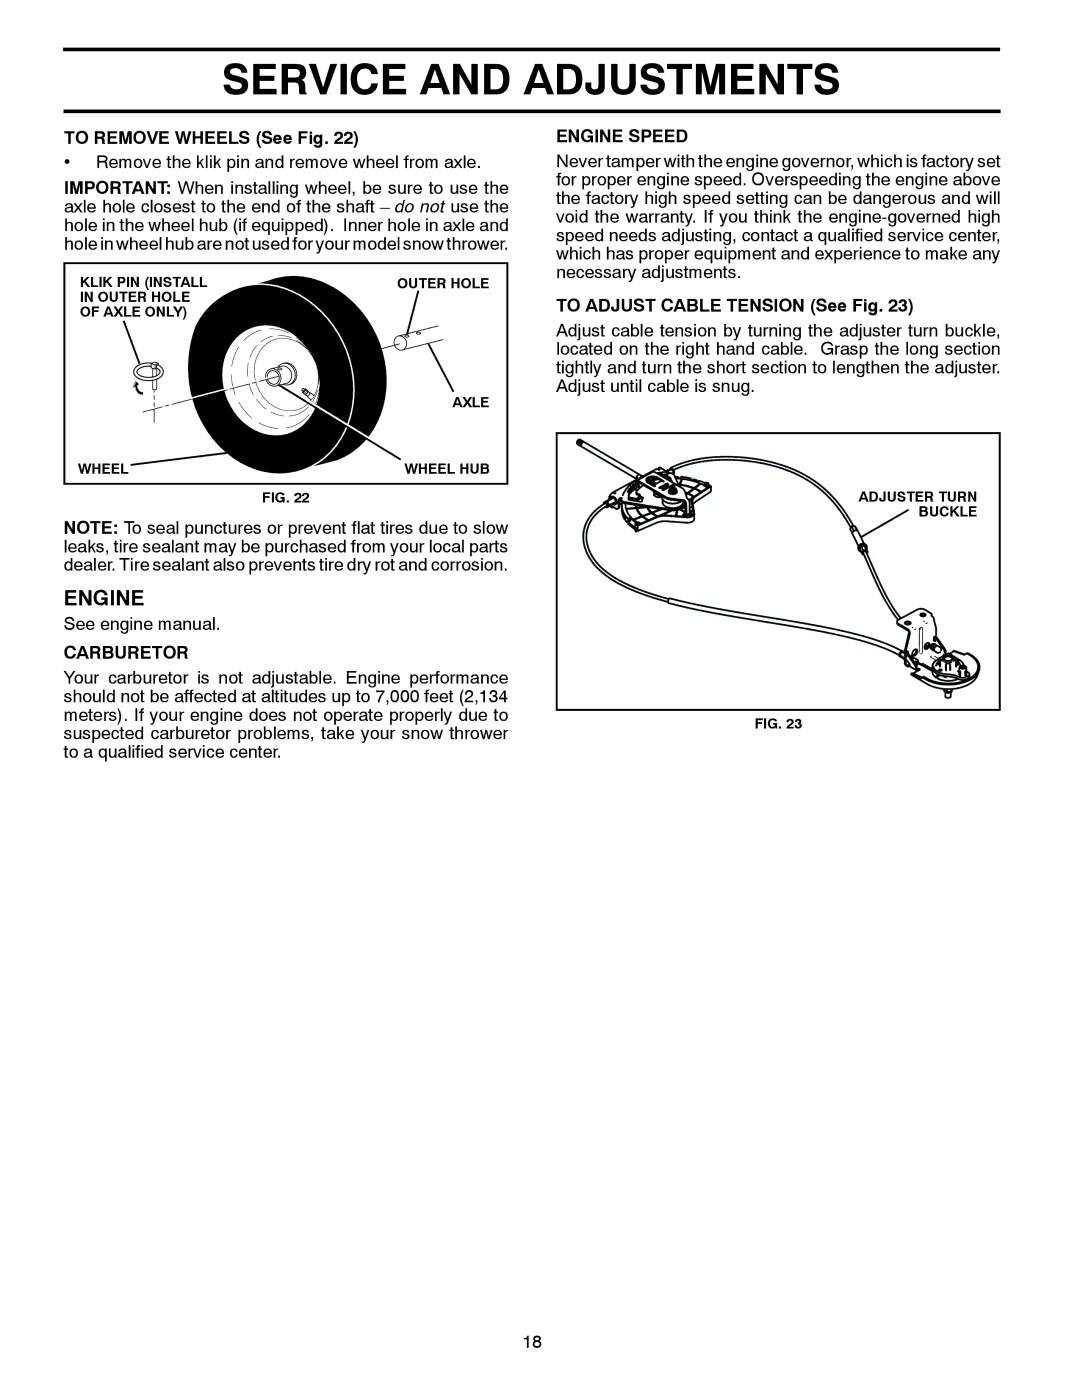 Poulan 437685, 96198003304 owner manual To Remove Wheels See Fig, Carburetor, Engine Speed, To Adjust Cable Tension See Fig 